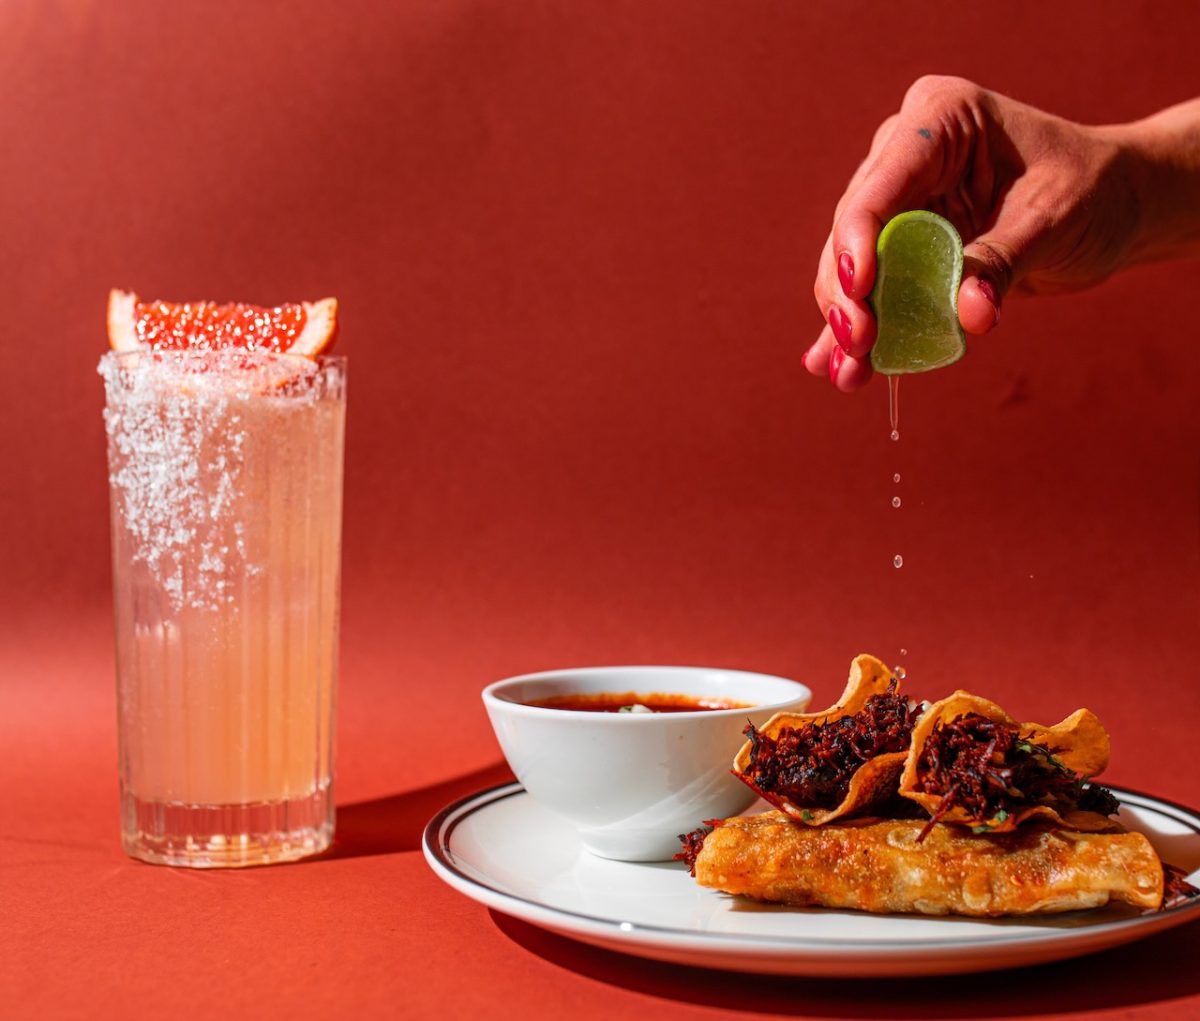 person squeezes lime onto crispy looking tacos. Red background and highball drink in background.